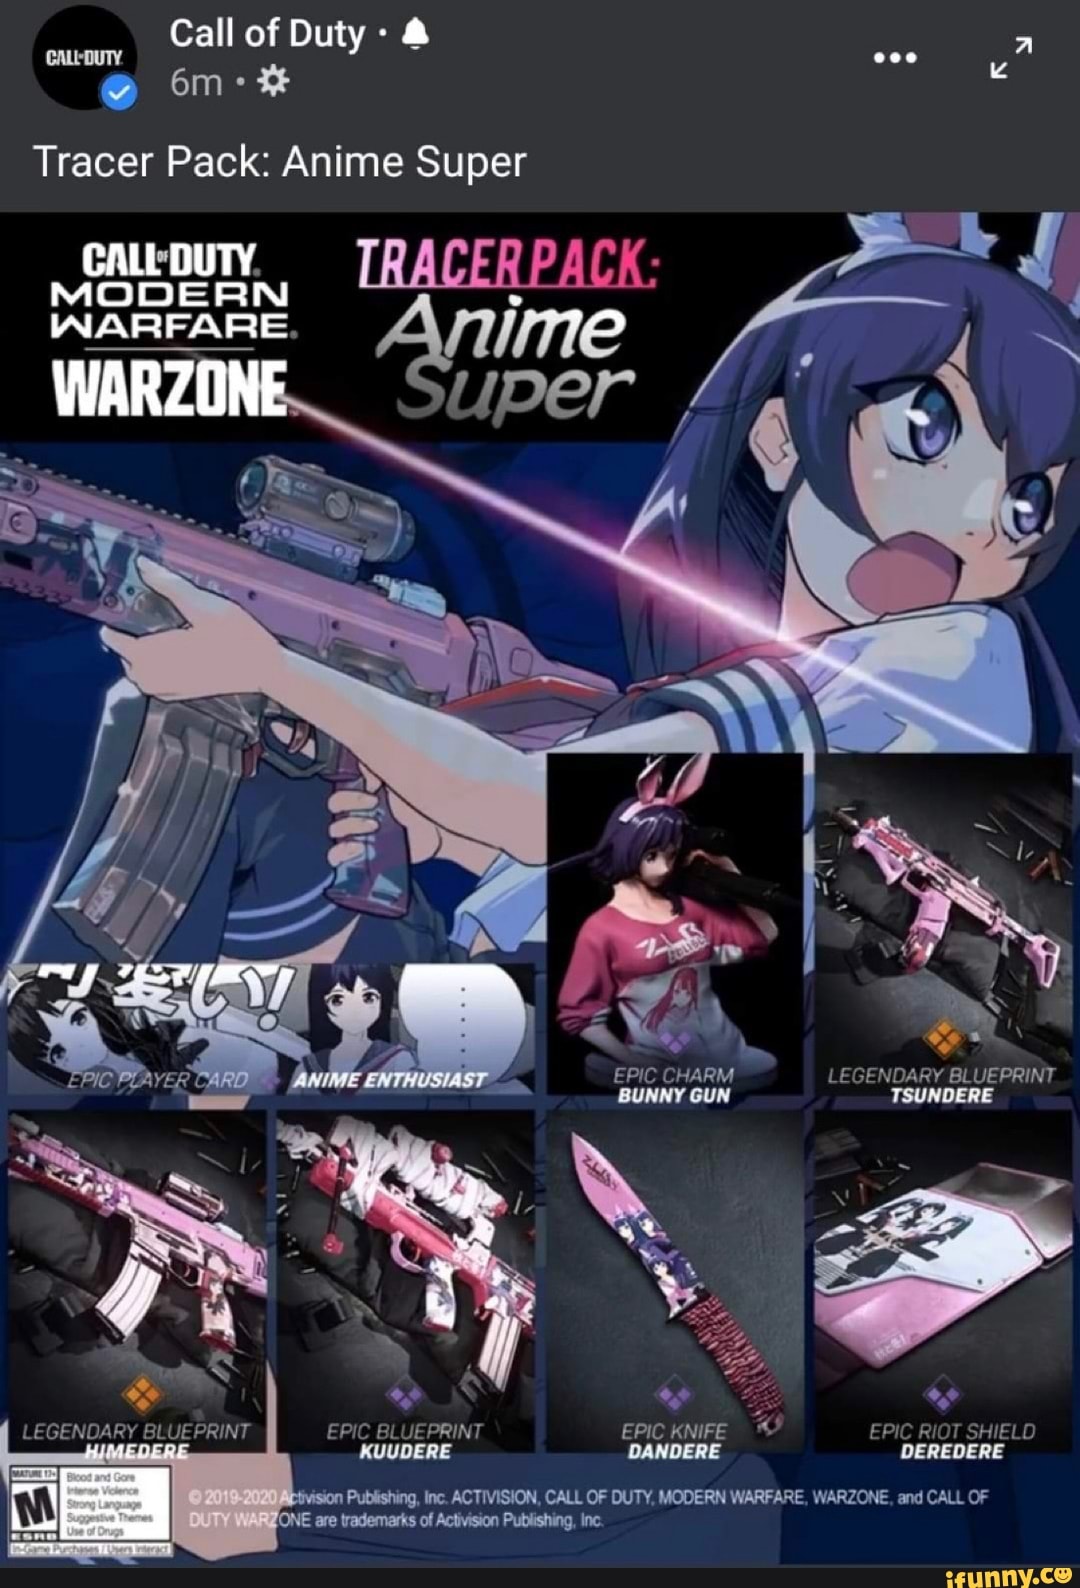 Featured image of post Anime Super Pack Modern Warfare In this video of call of duty modern warfare warzone i decided to show off the anime super tracer pack warzone or tracer pack anime super modern